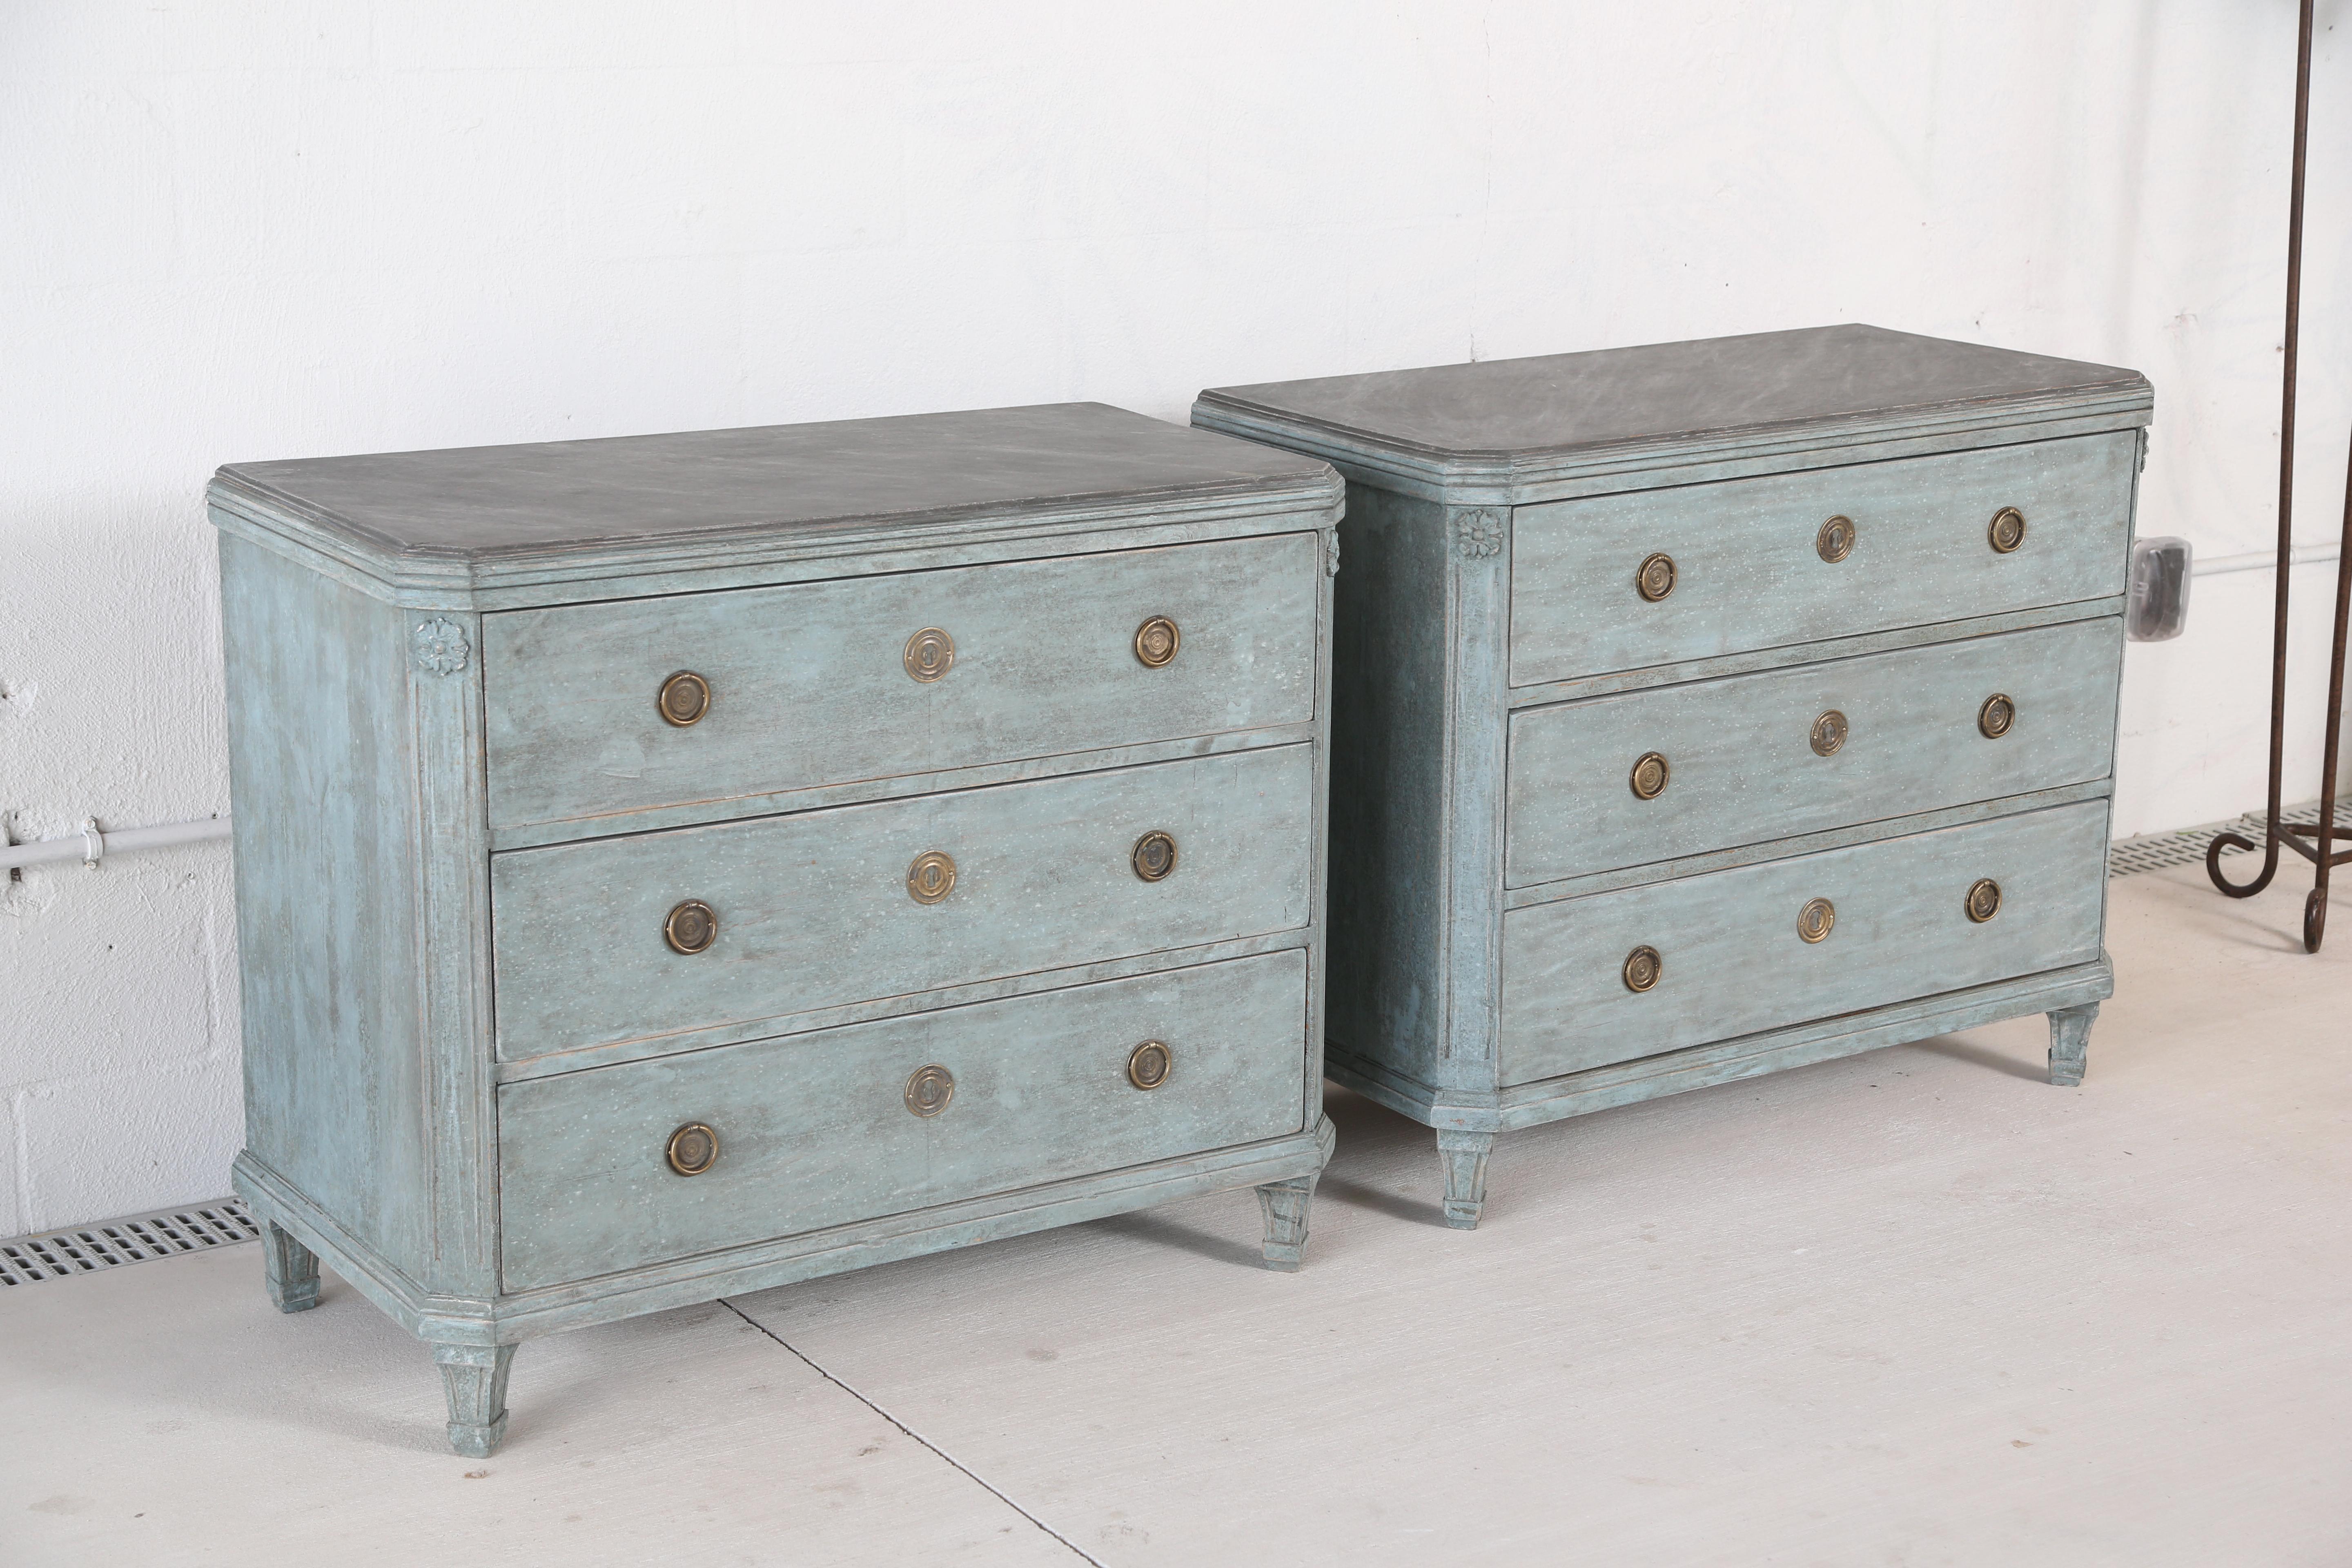 Pair of antique Swedish Gustavian style blue painted chests, each with faux painted marble tops in gray colors, three drawers with Classic Swedish brass hardware, cut corners with a rosette top and fluted,
 ending with tapered fluted legs. Lovely